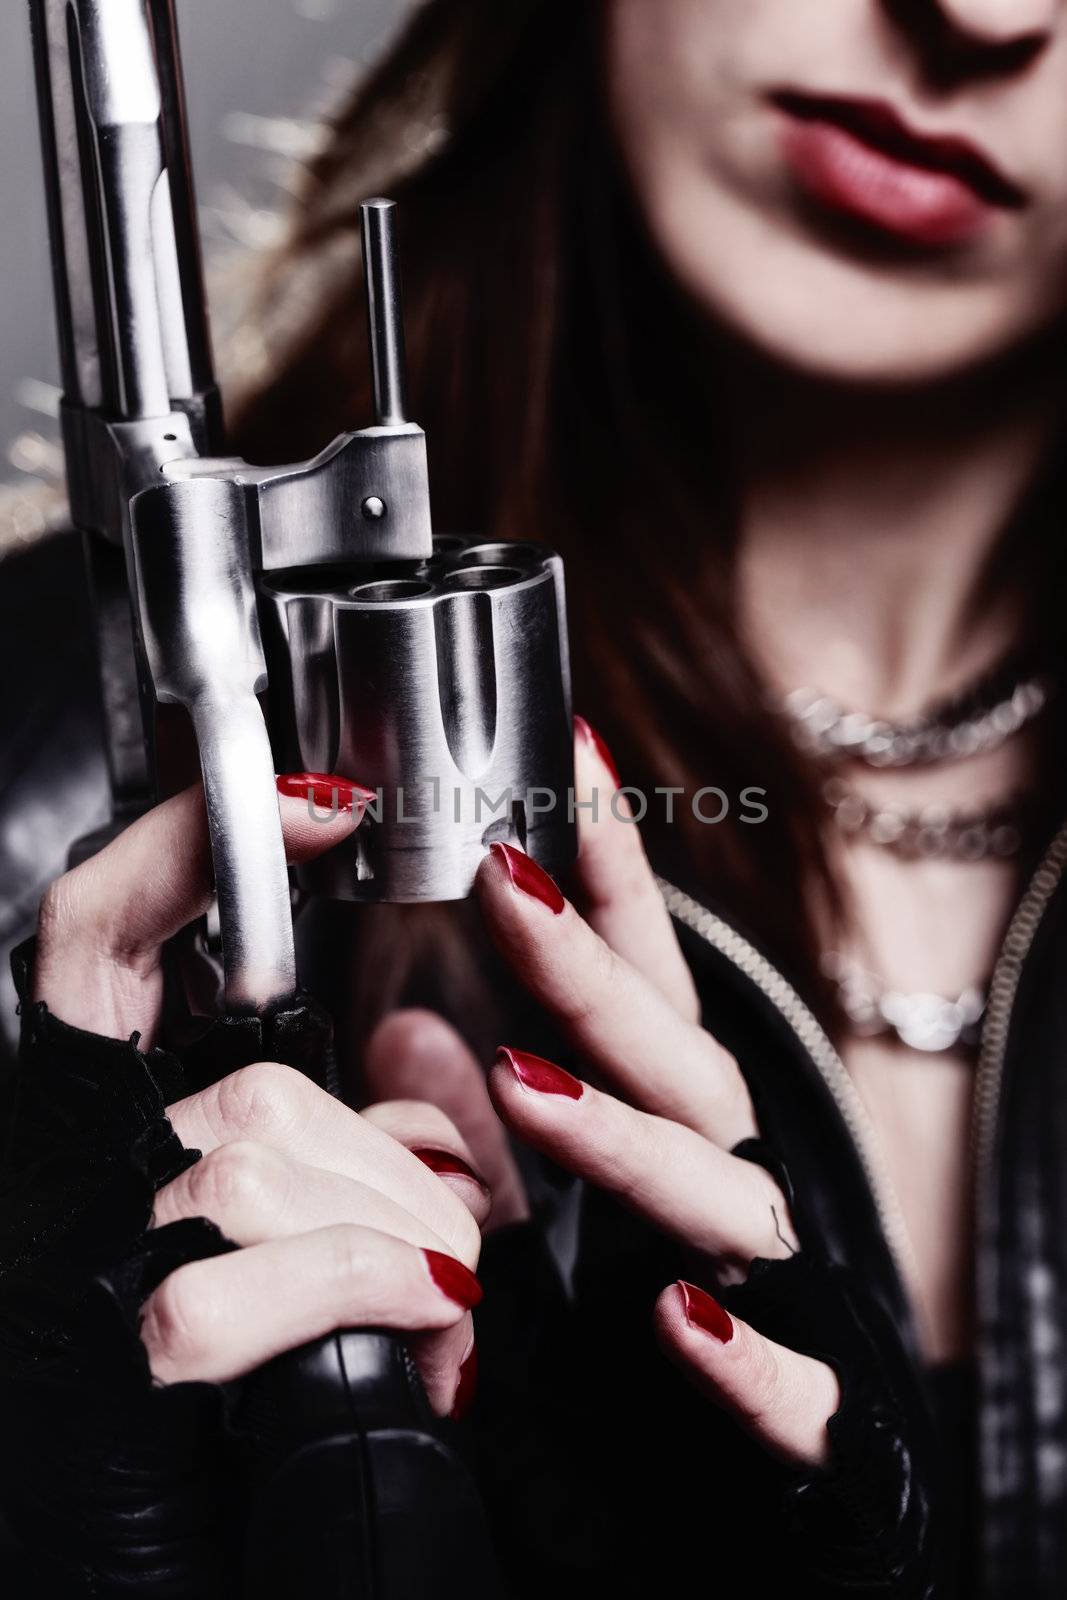 girl with a revolver by kokimk